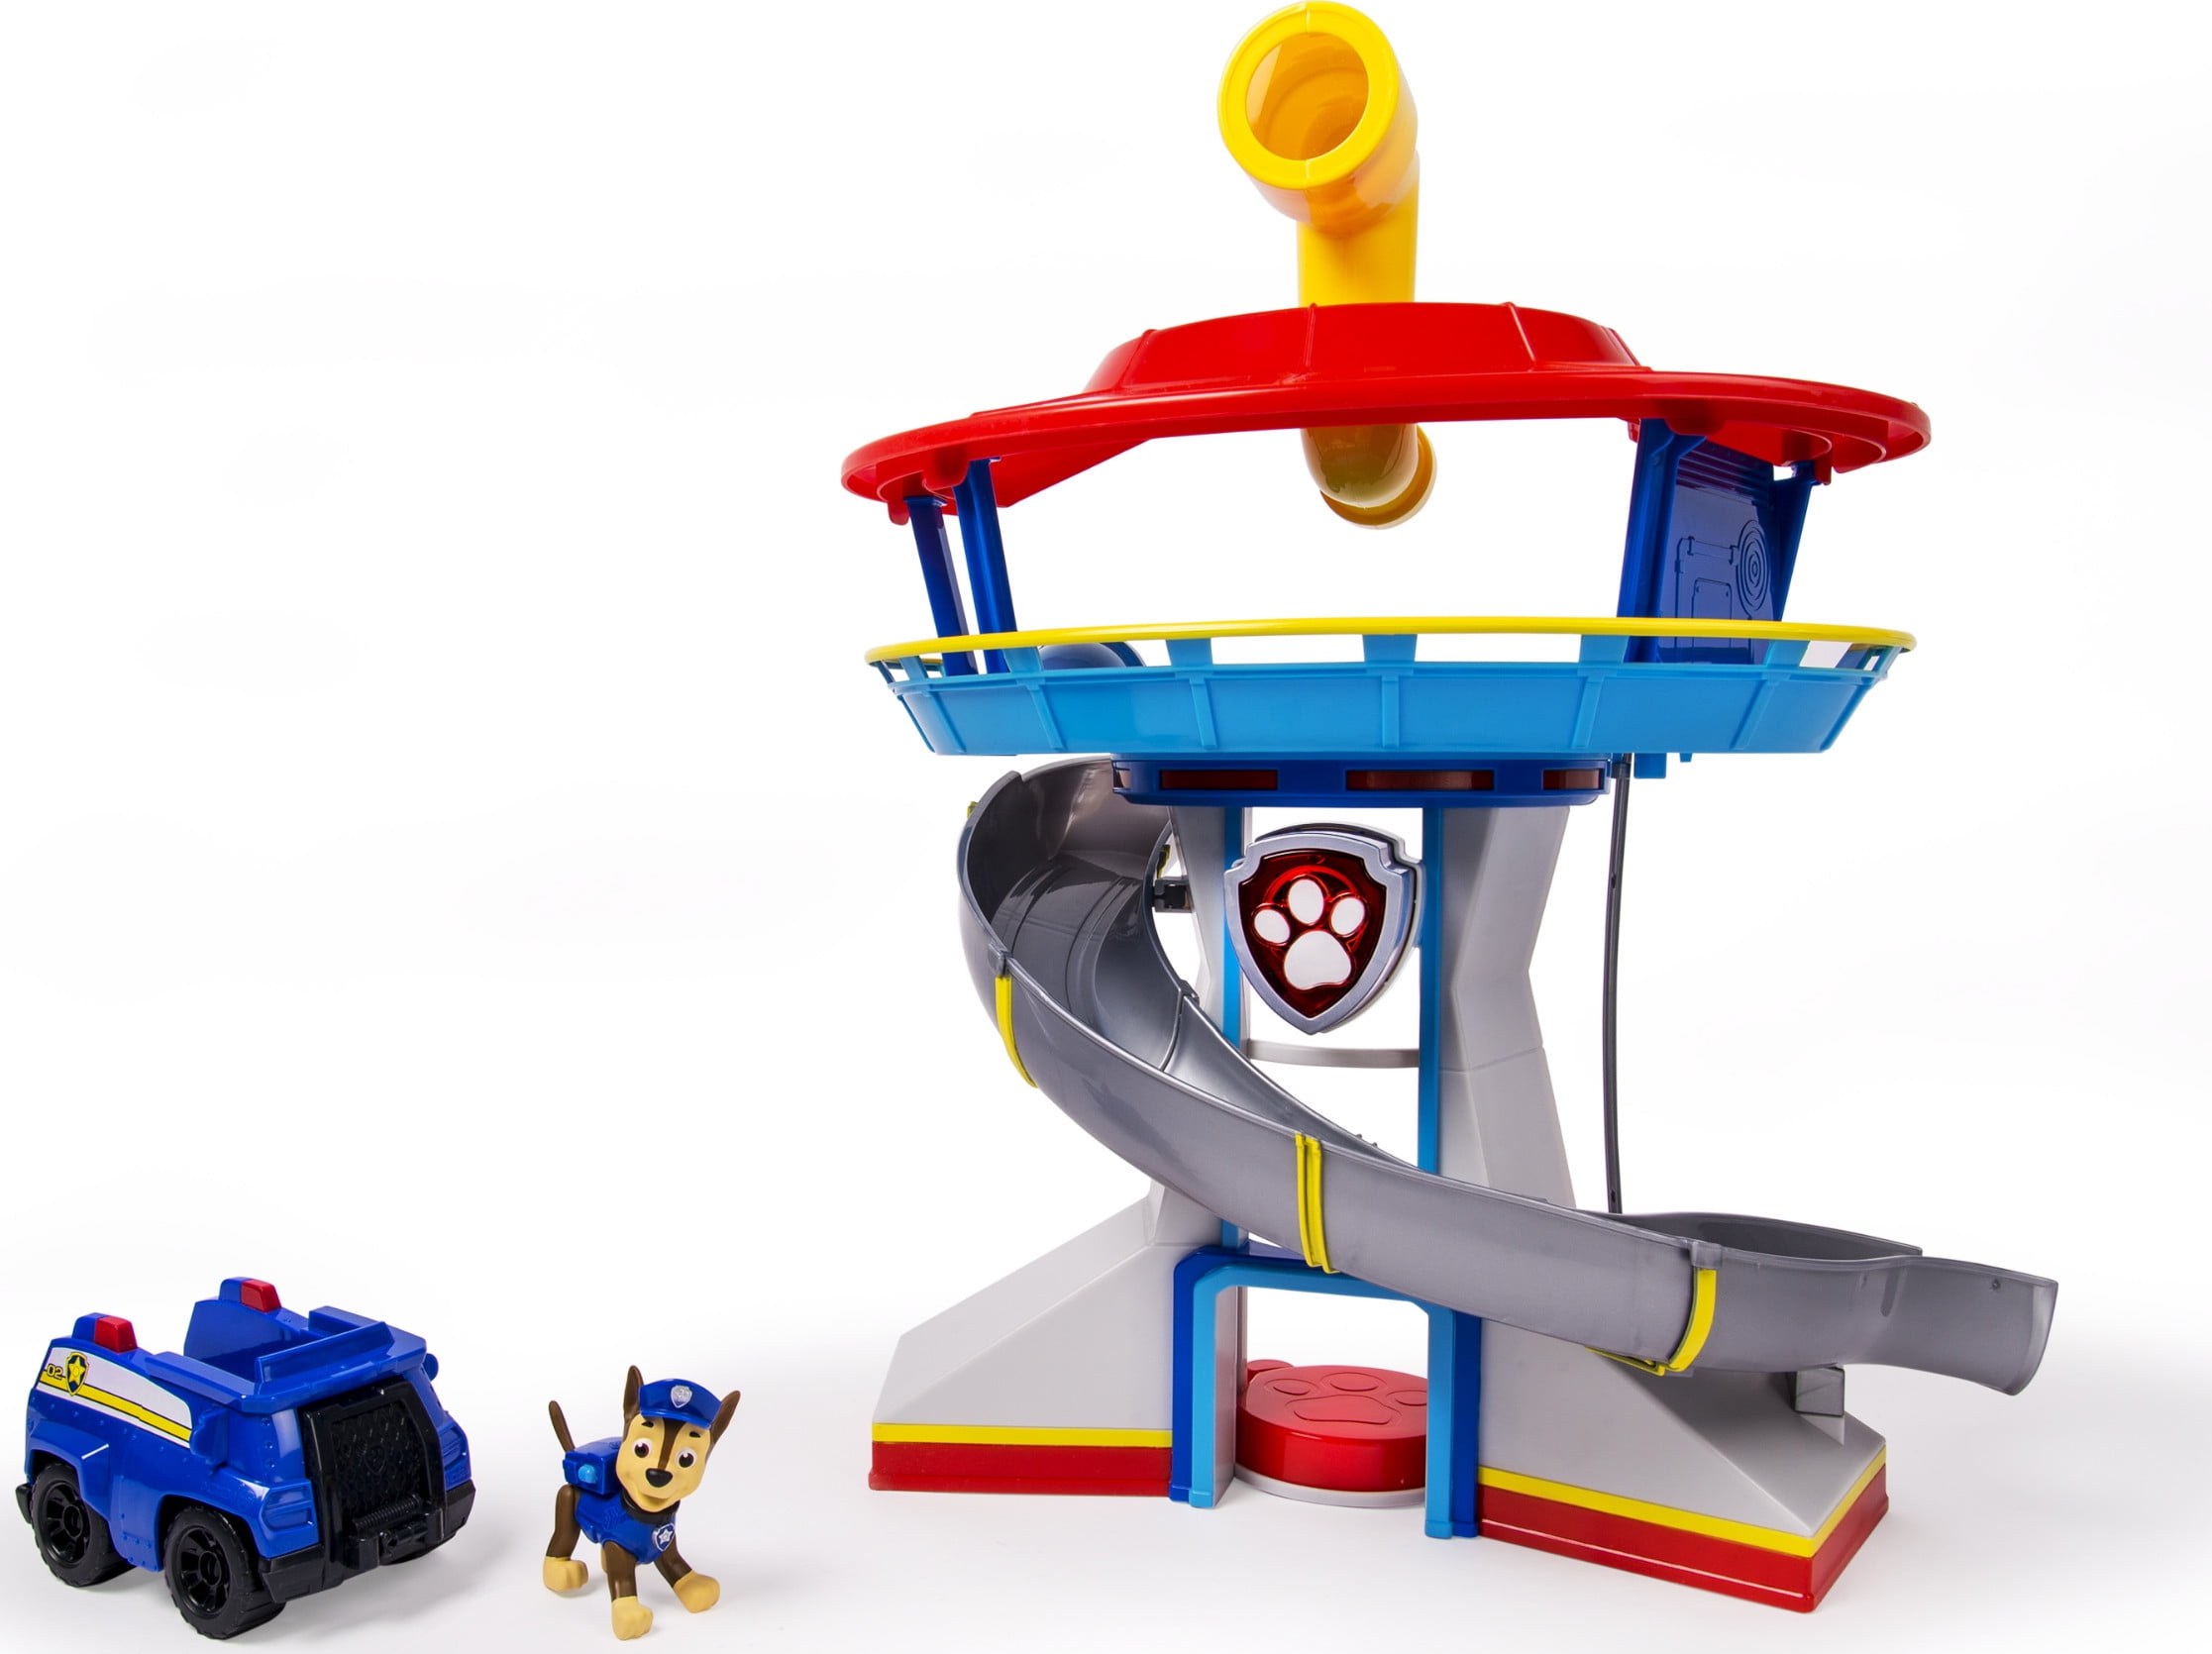 Paw Patrol Look-out Vehicle and Figure for Ages 3 and Up -